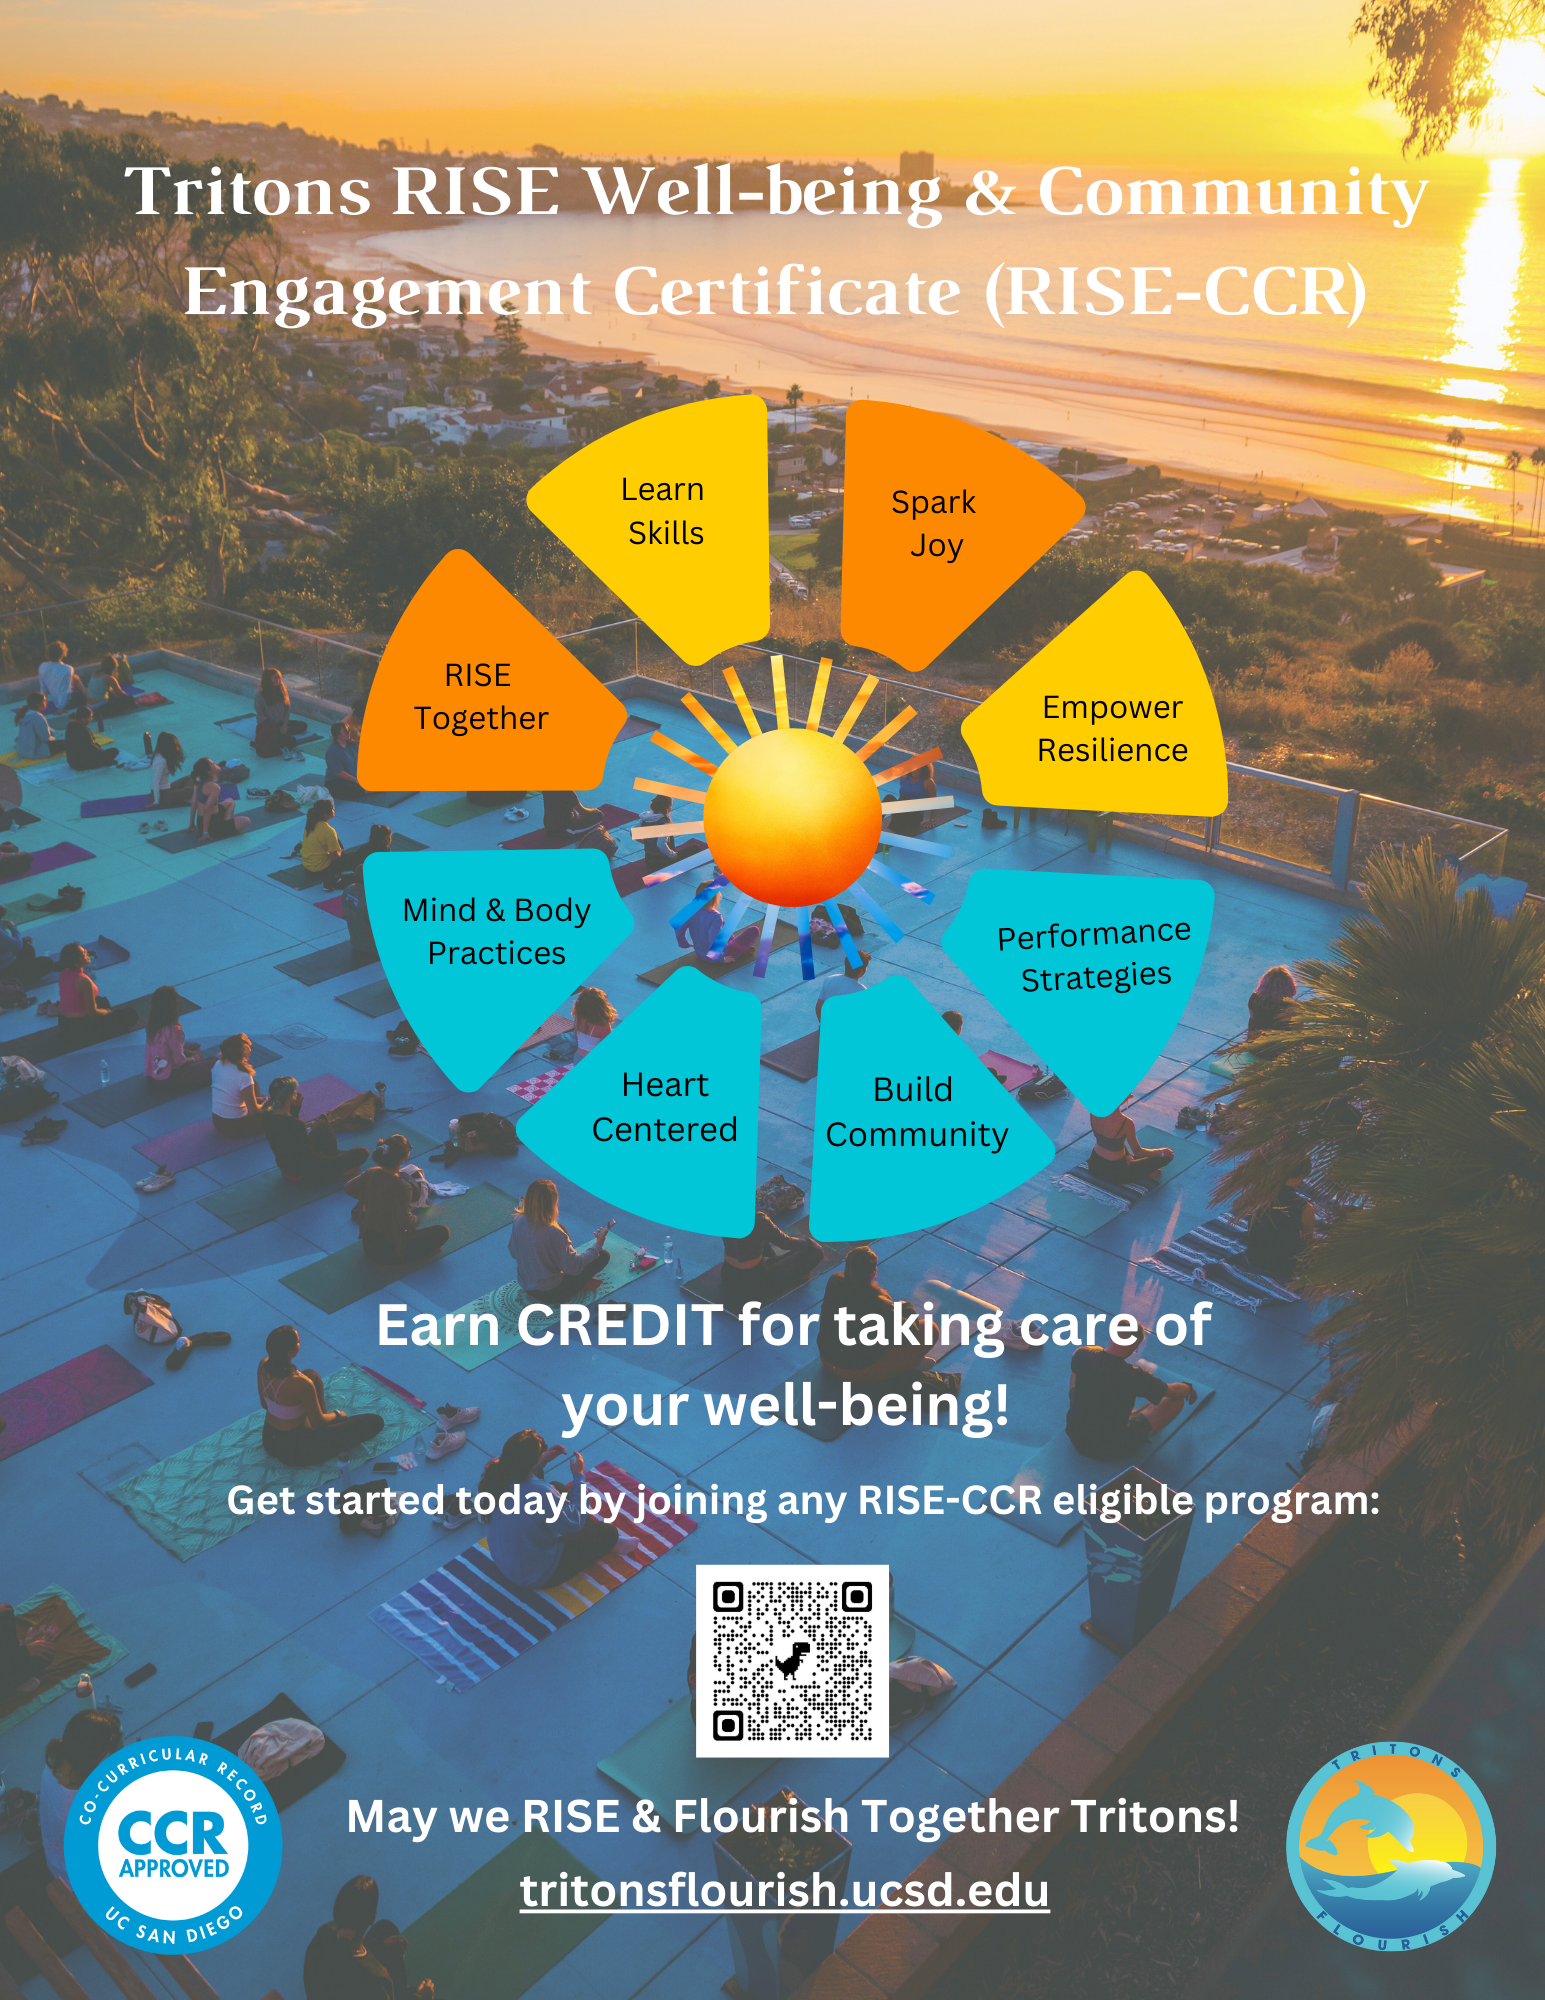 Tritons RISE Well-being & Community Engagement Certificate (RISE-CCR)